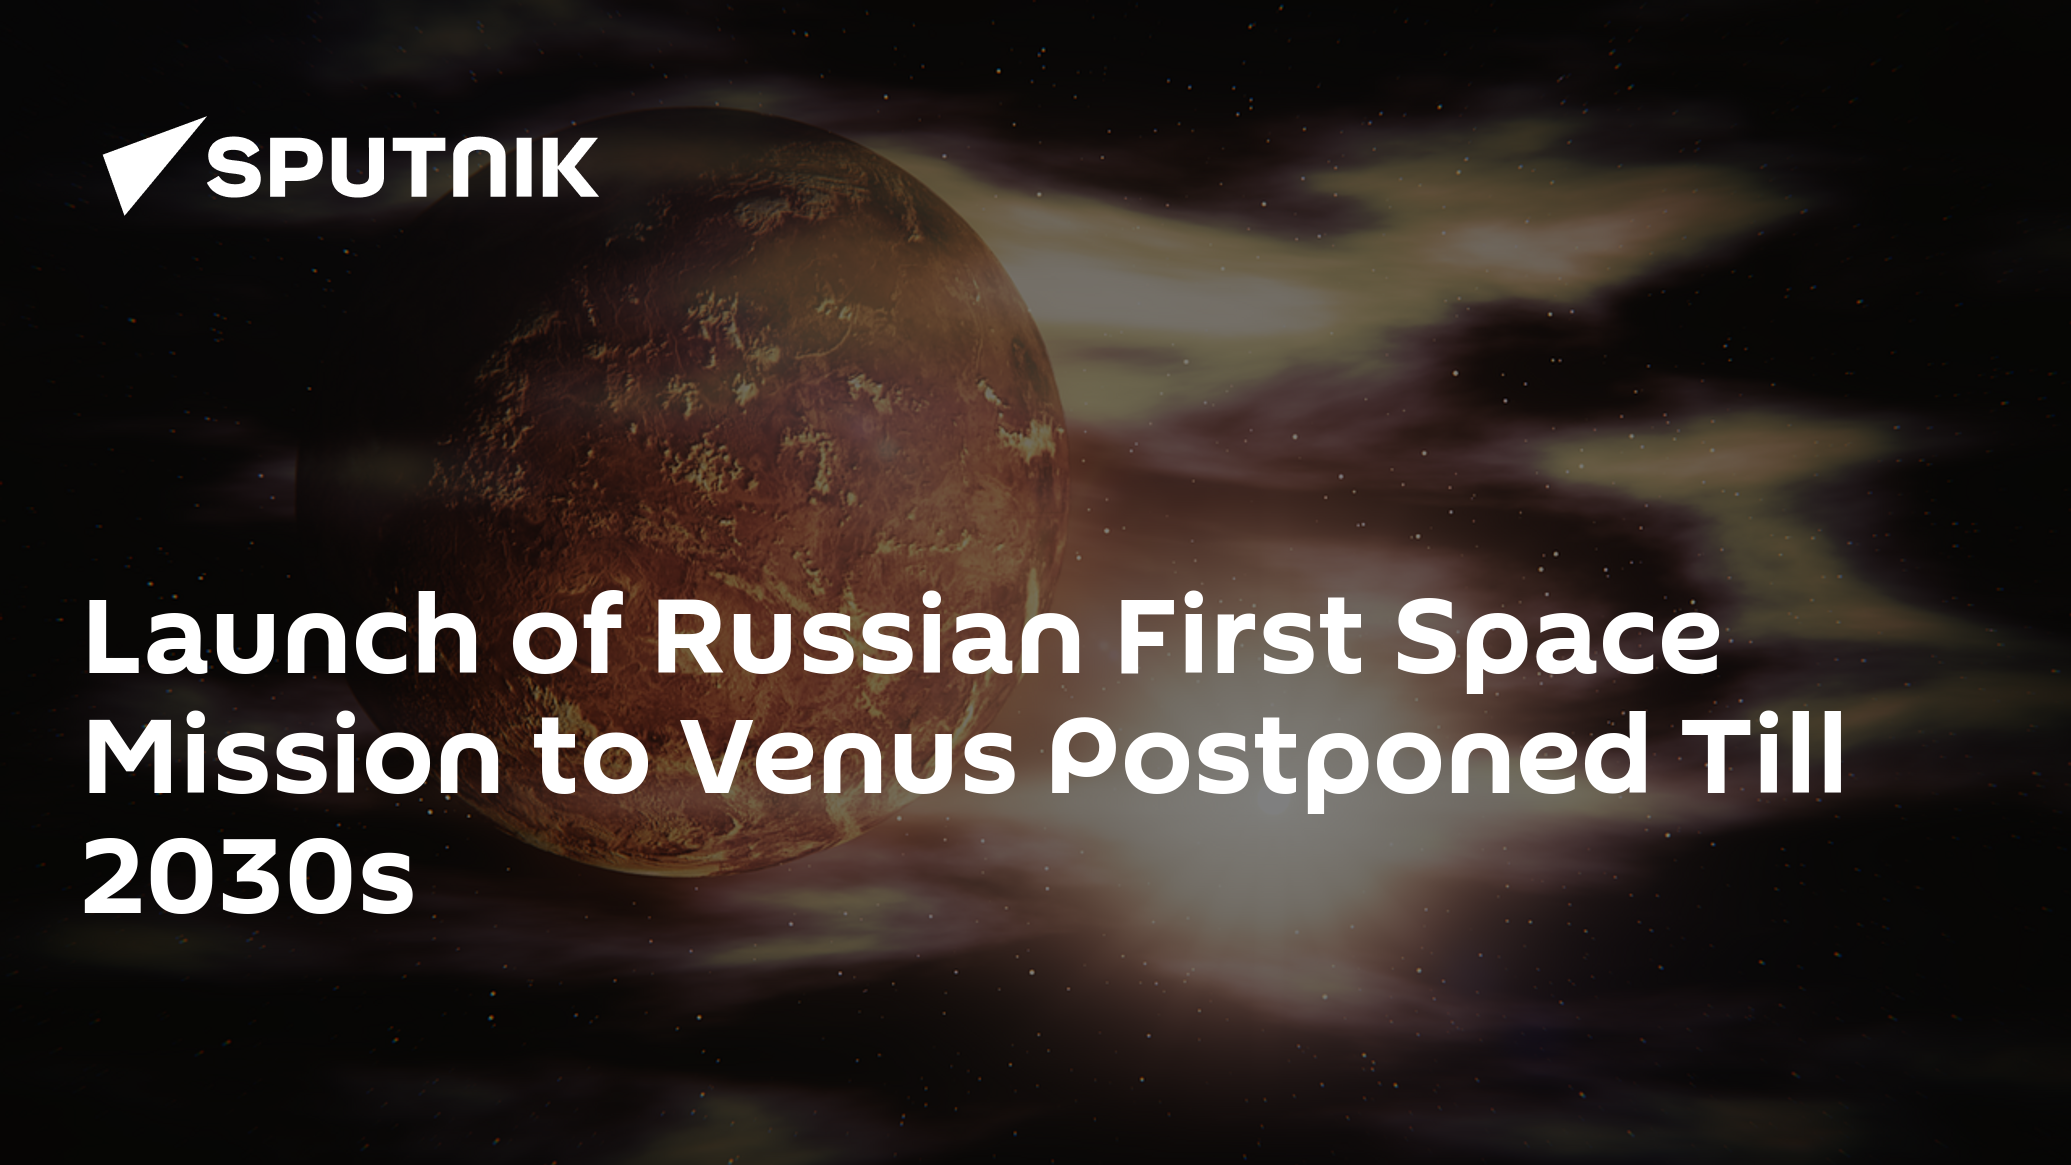 Launch of Russian First Space Mission to Venus Postponed Till 2030s